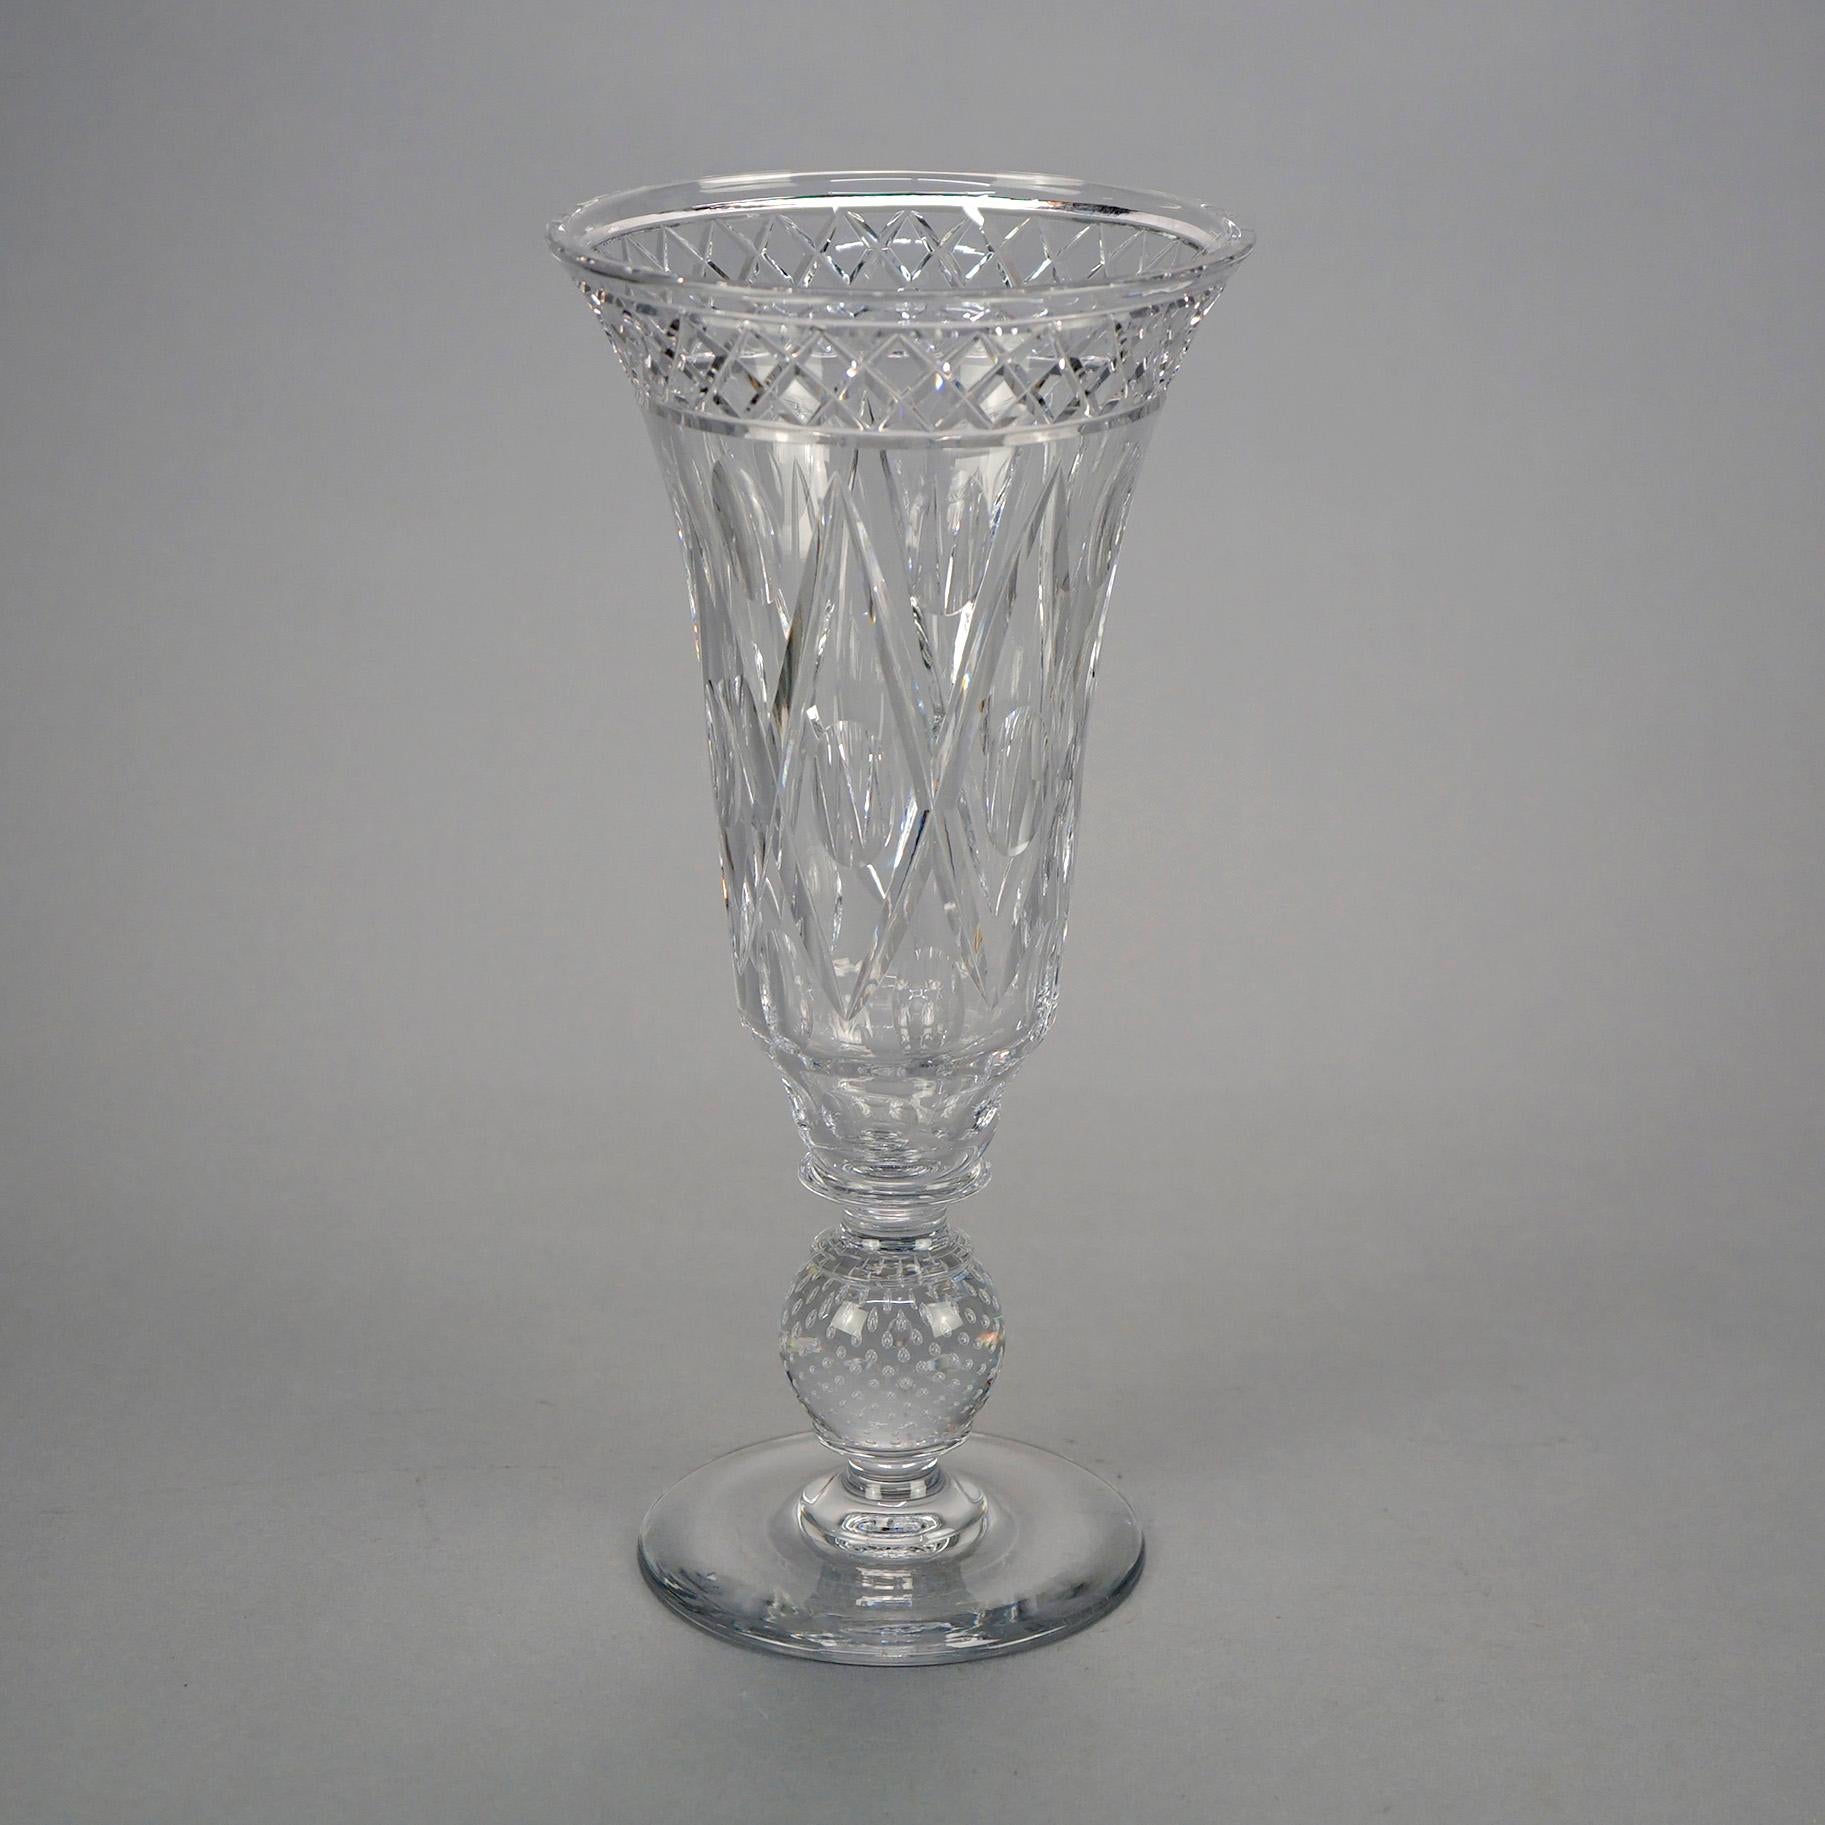 An antique pair of vases by Pairpoint offers art glass in flared form with diamond cut design raised on bubble glass ball form stem, signed as photographed, c1910

Measures- 13.25'' H x 6.25'' W x 6.25'' D.